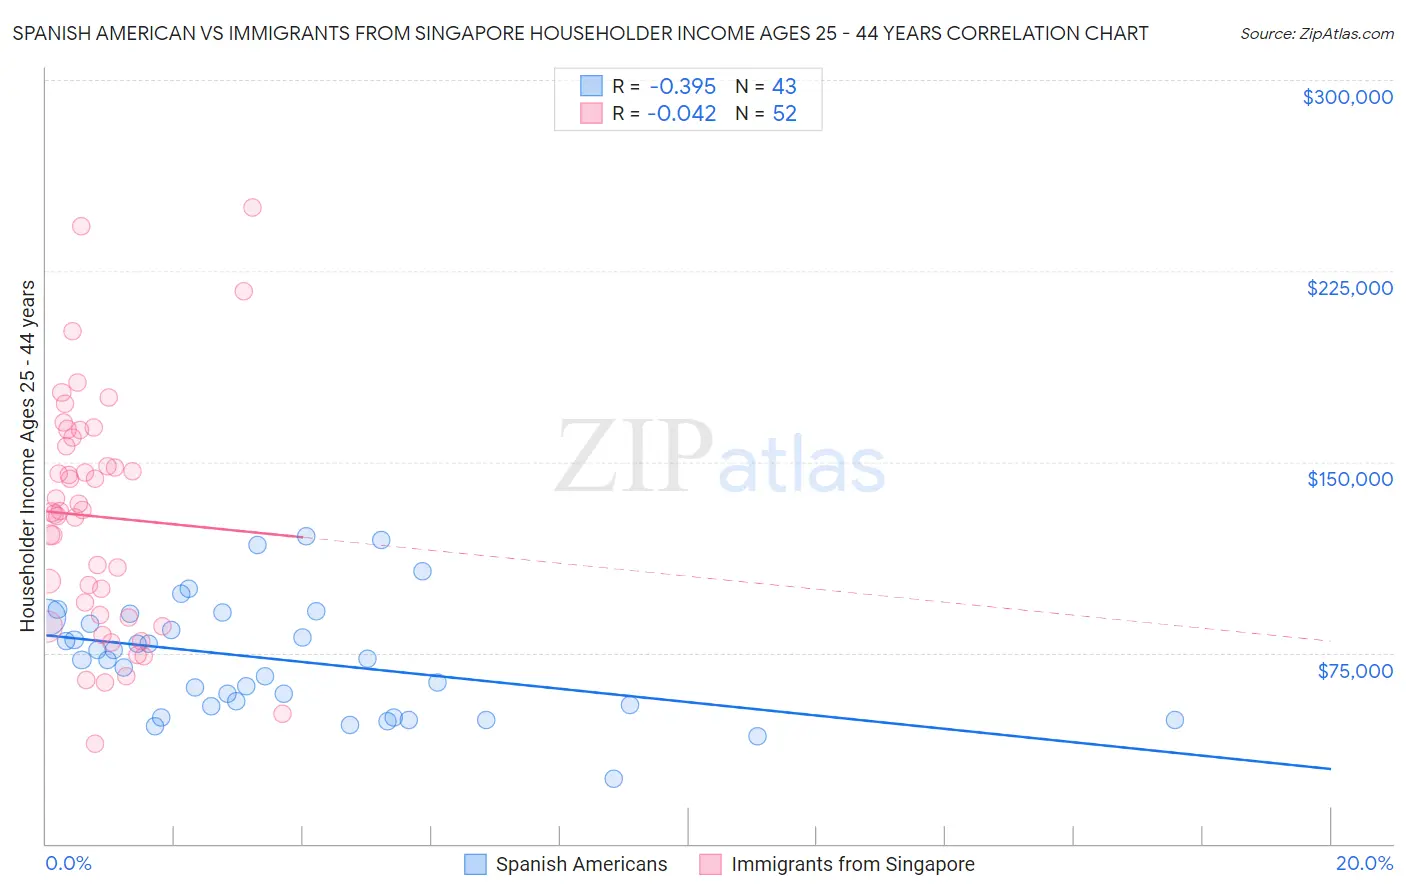 Spanish American vs Immigrants from Singapore Householder Income Ages 25 - 44 years